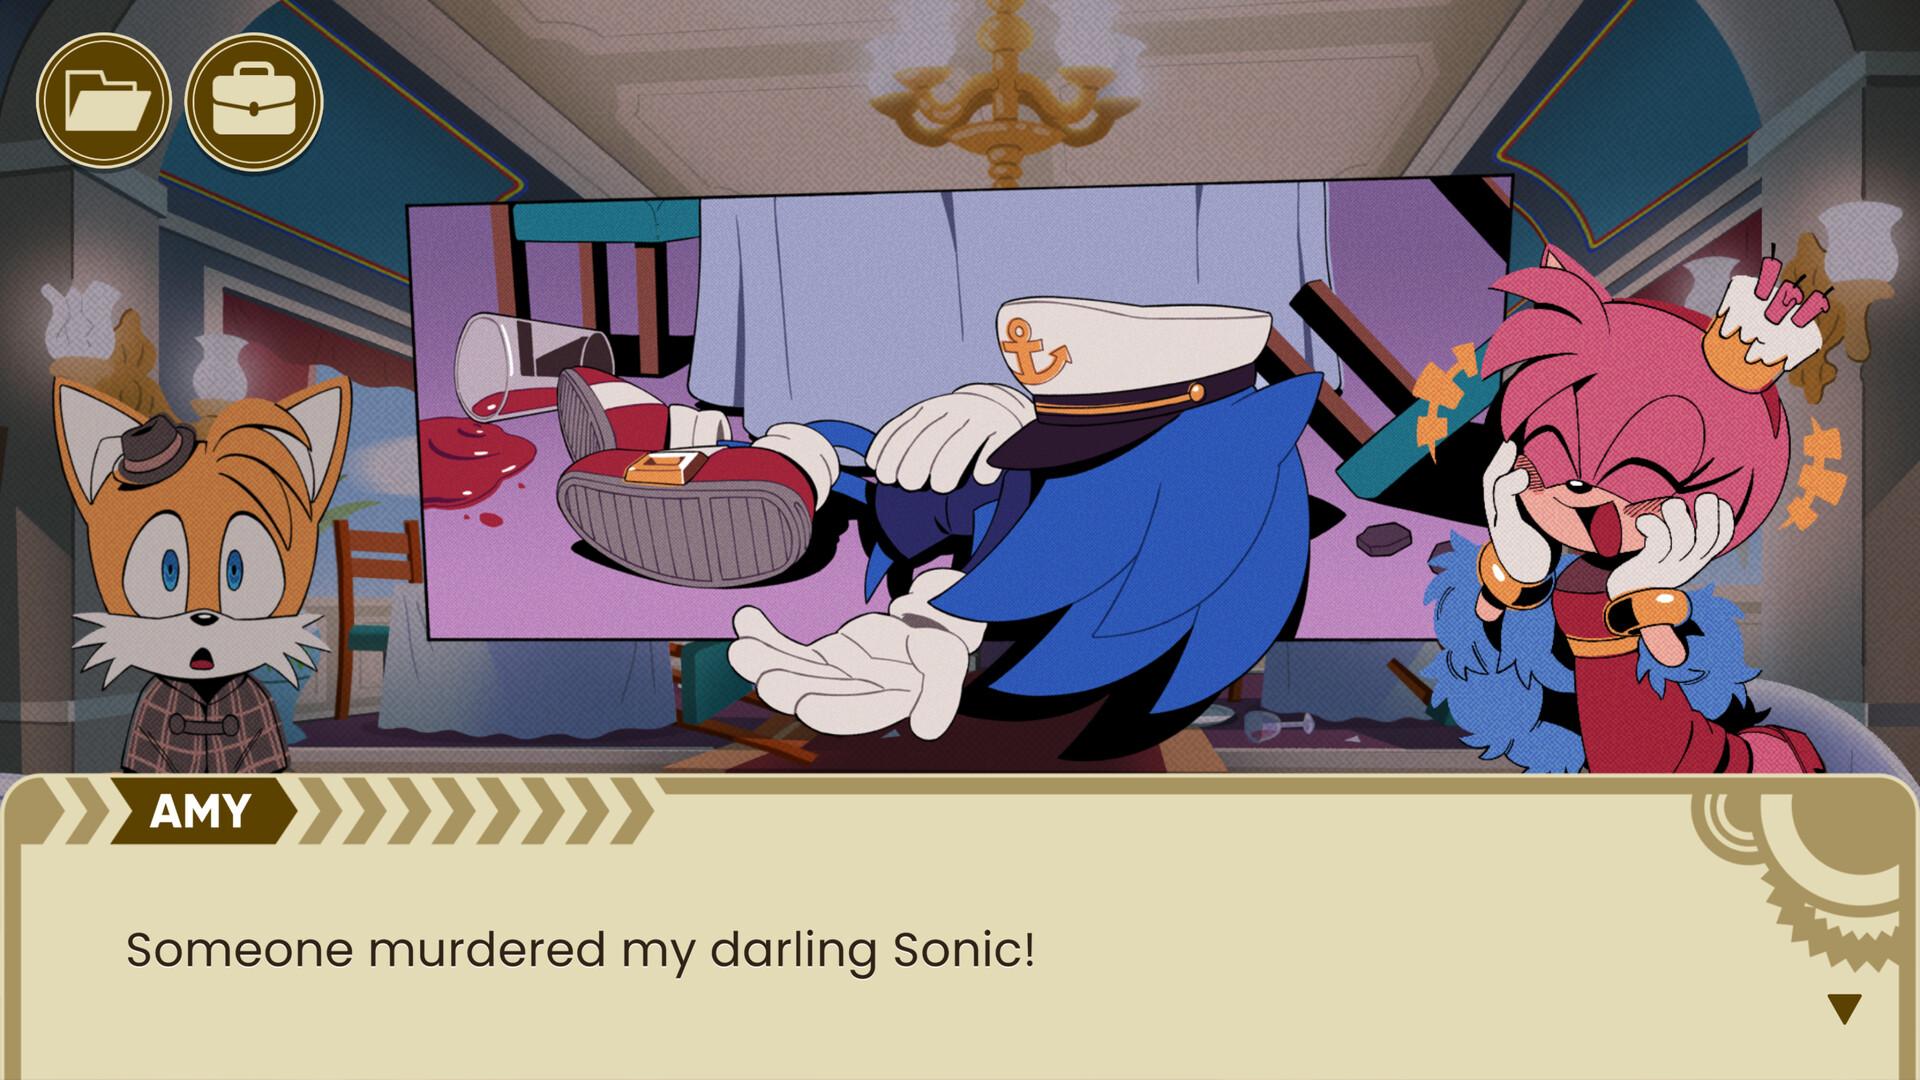 Screenshot №1 from game The Murder of Sonic the Hedgehog